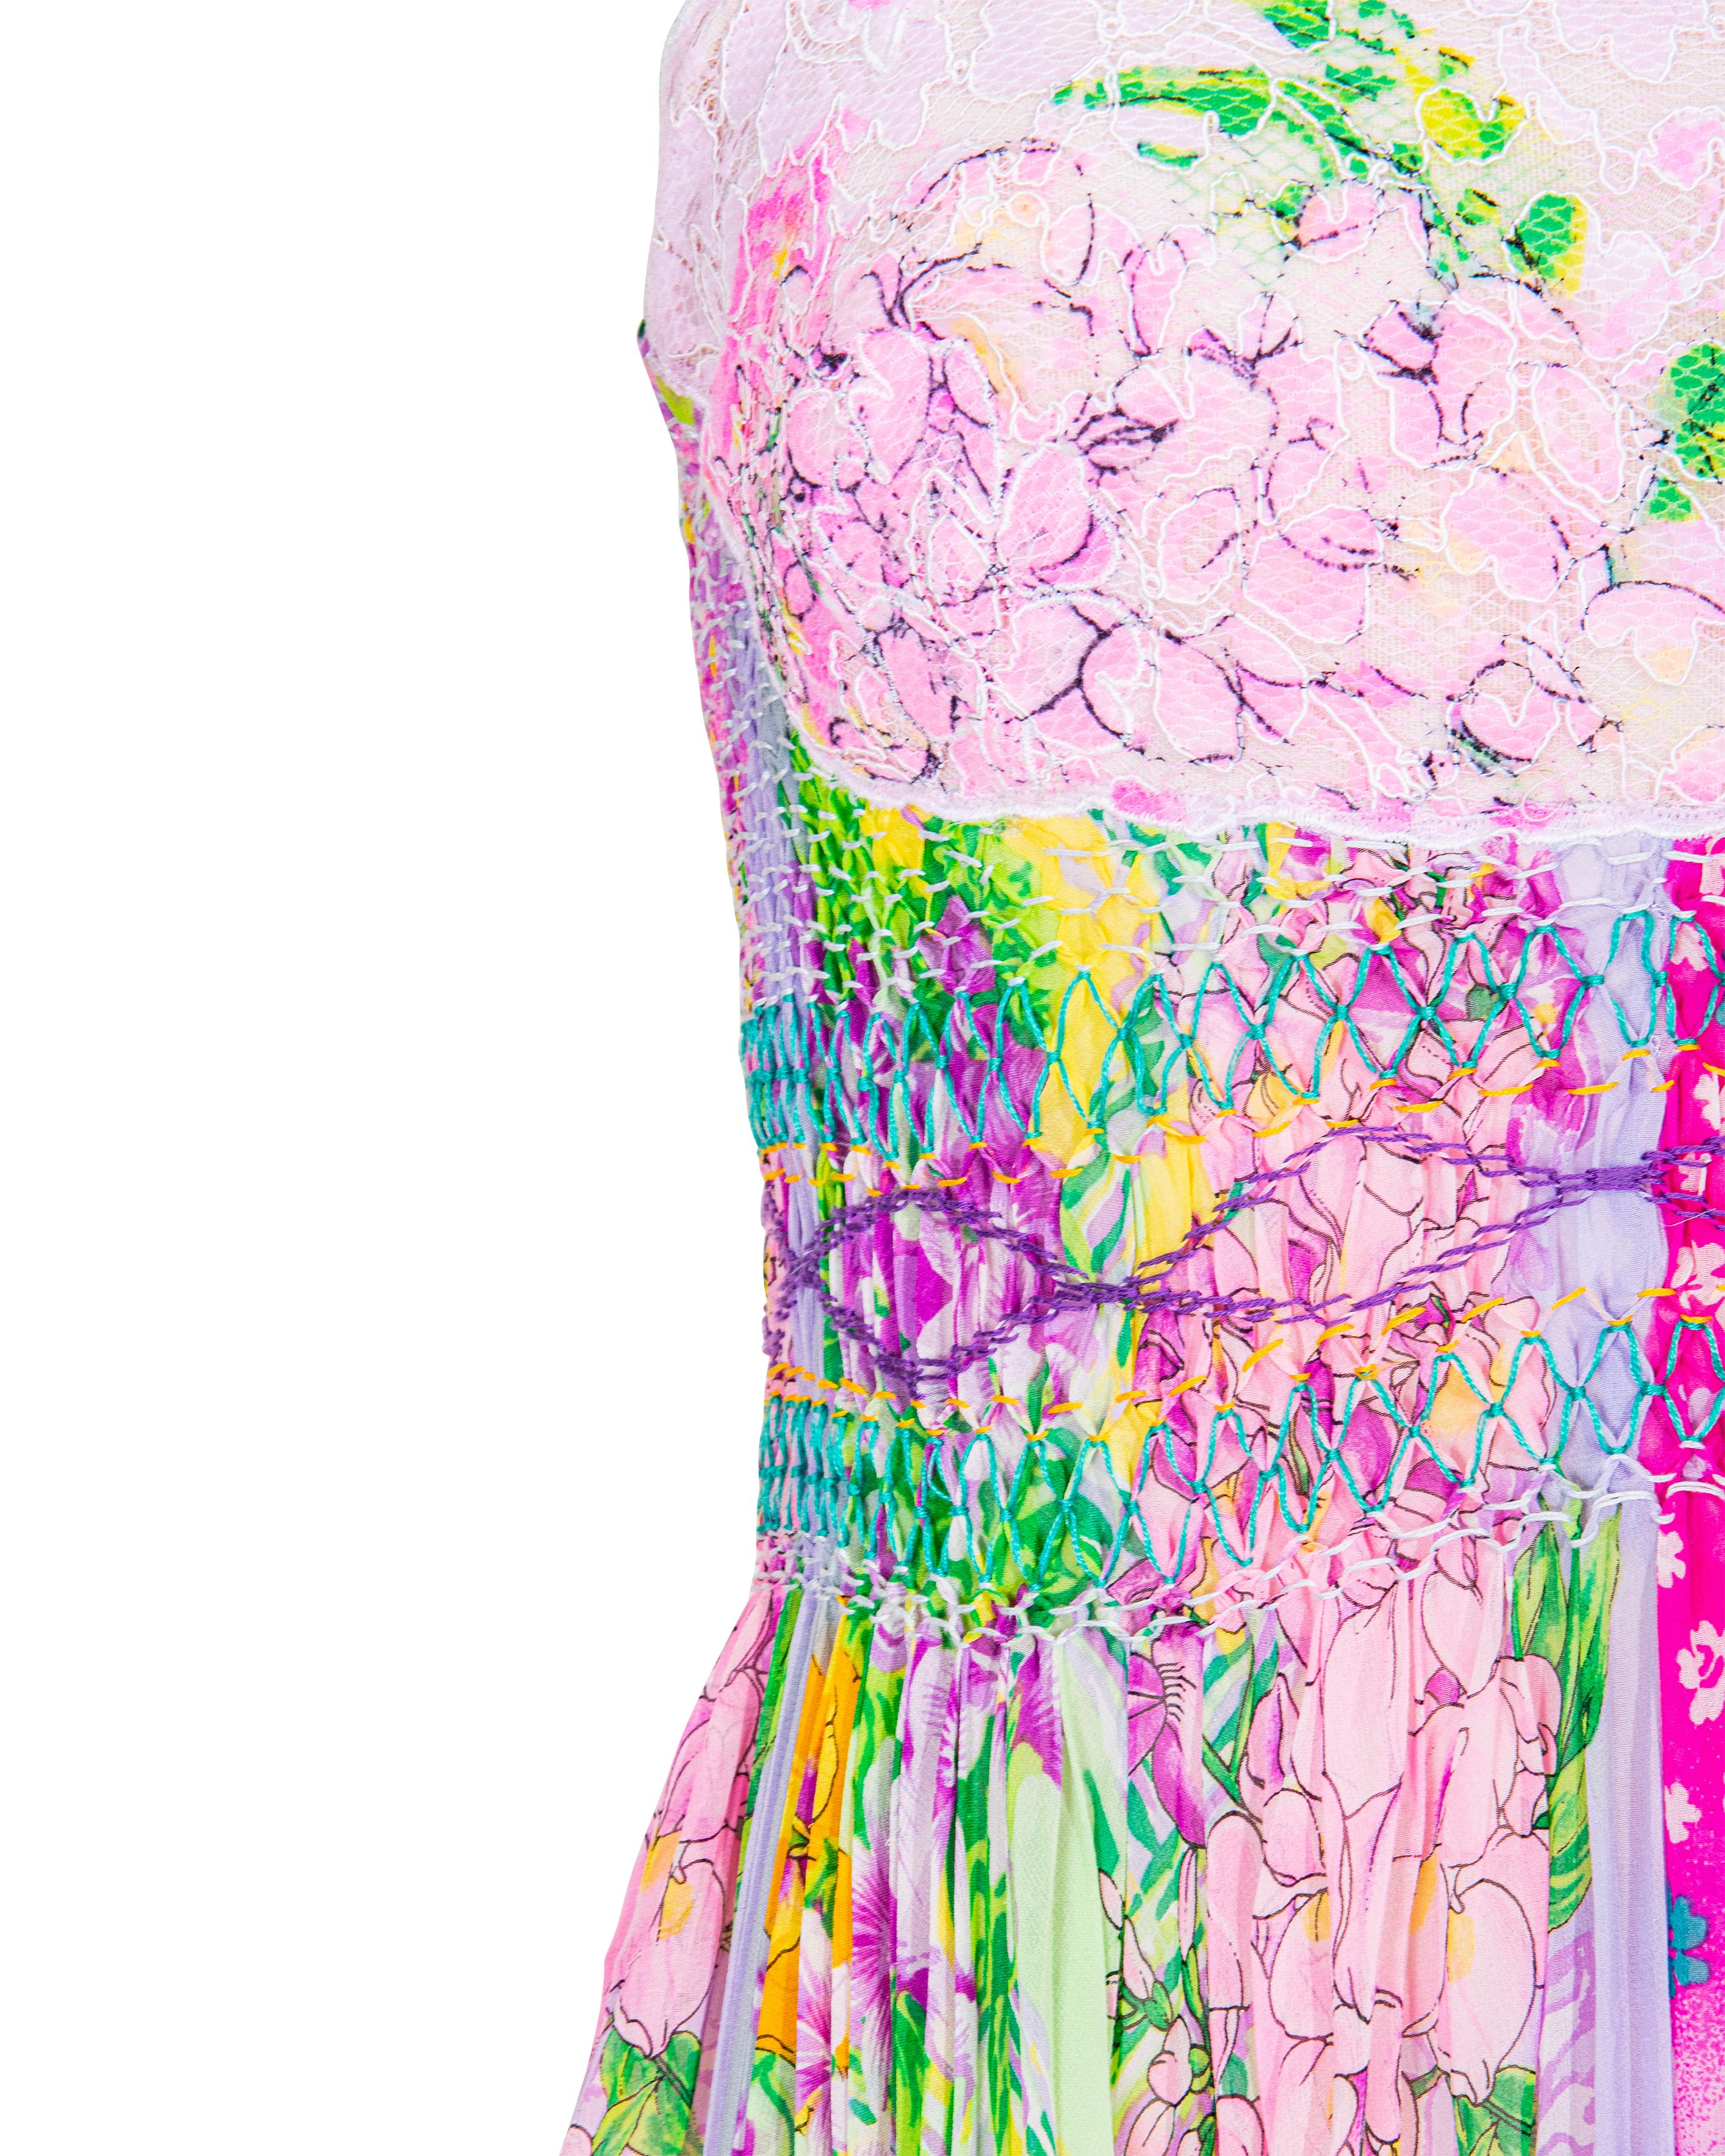 S/S 1994 Gianni Versace Multicolor Floral Pleated Honeycomb Mini Dress 1